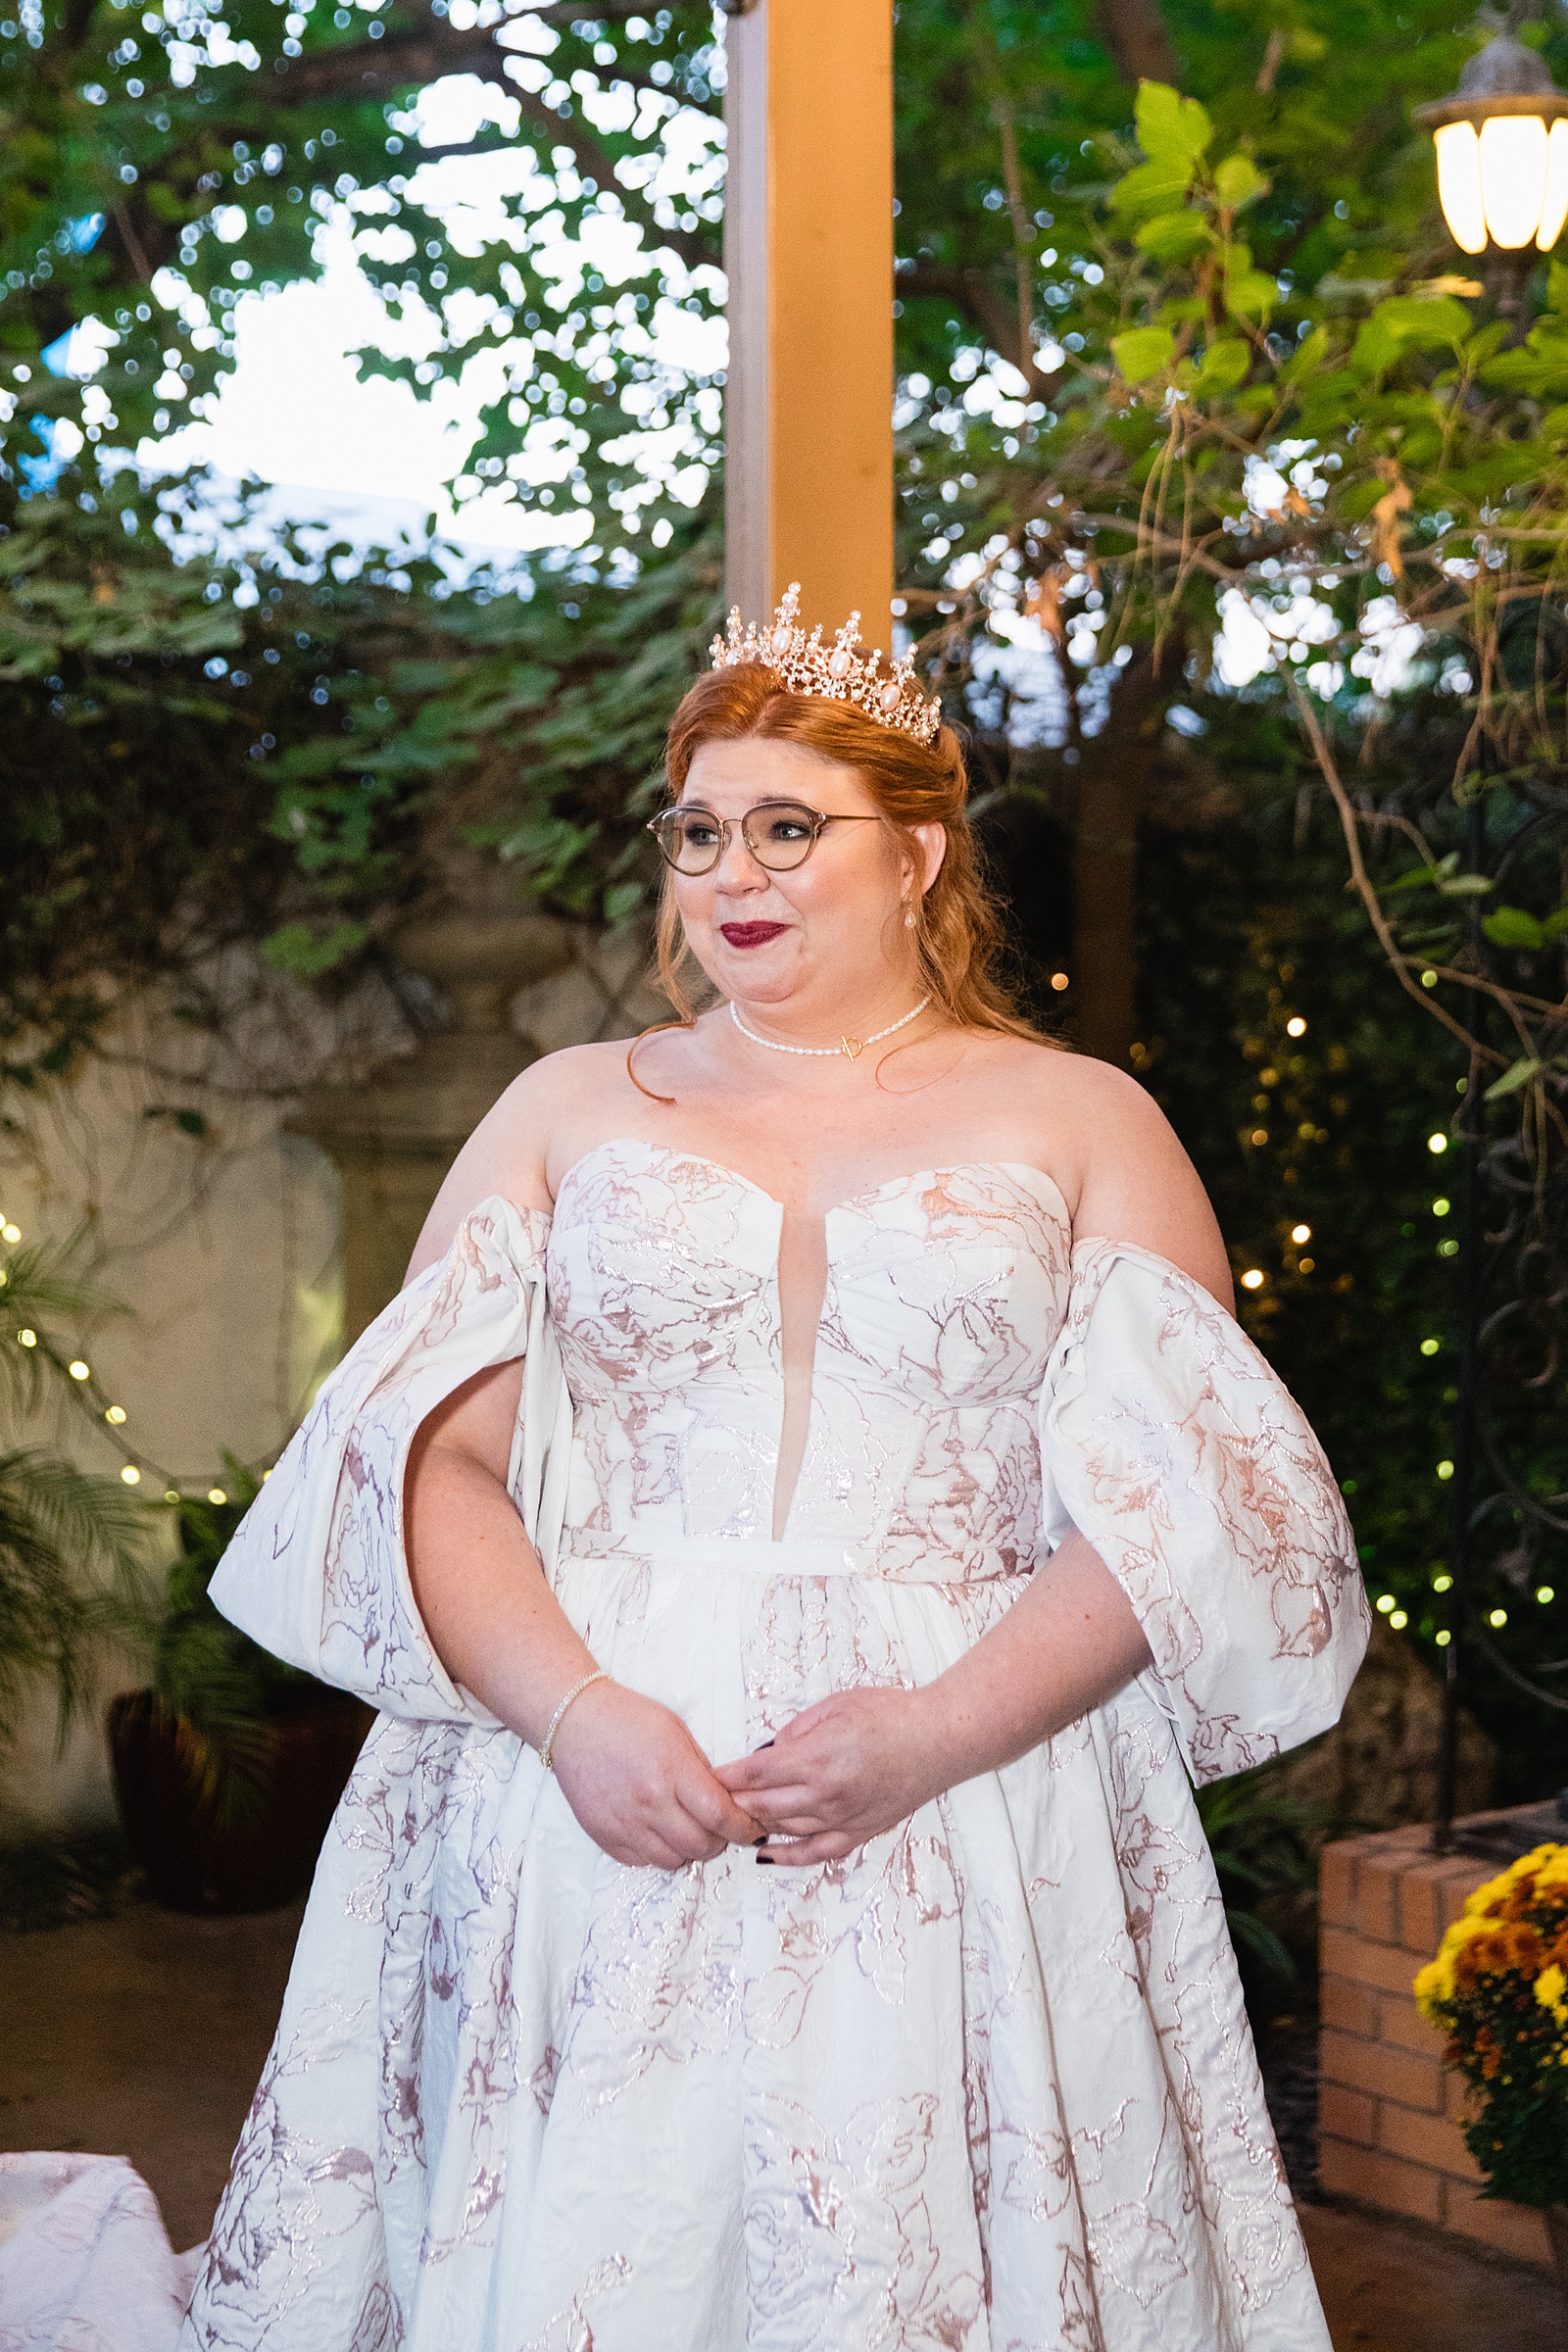 Bride looking at her bride during their wedding ceremony at Regency Garden by Mesa wedding photographer Juniper and Co Photography.